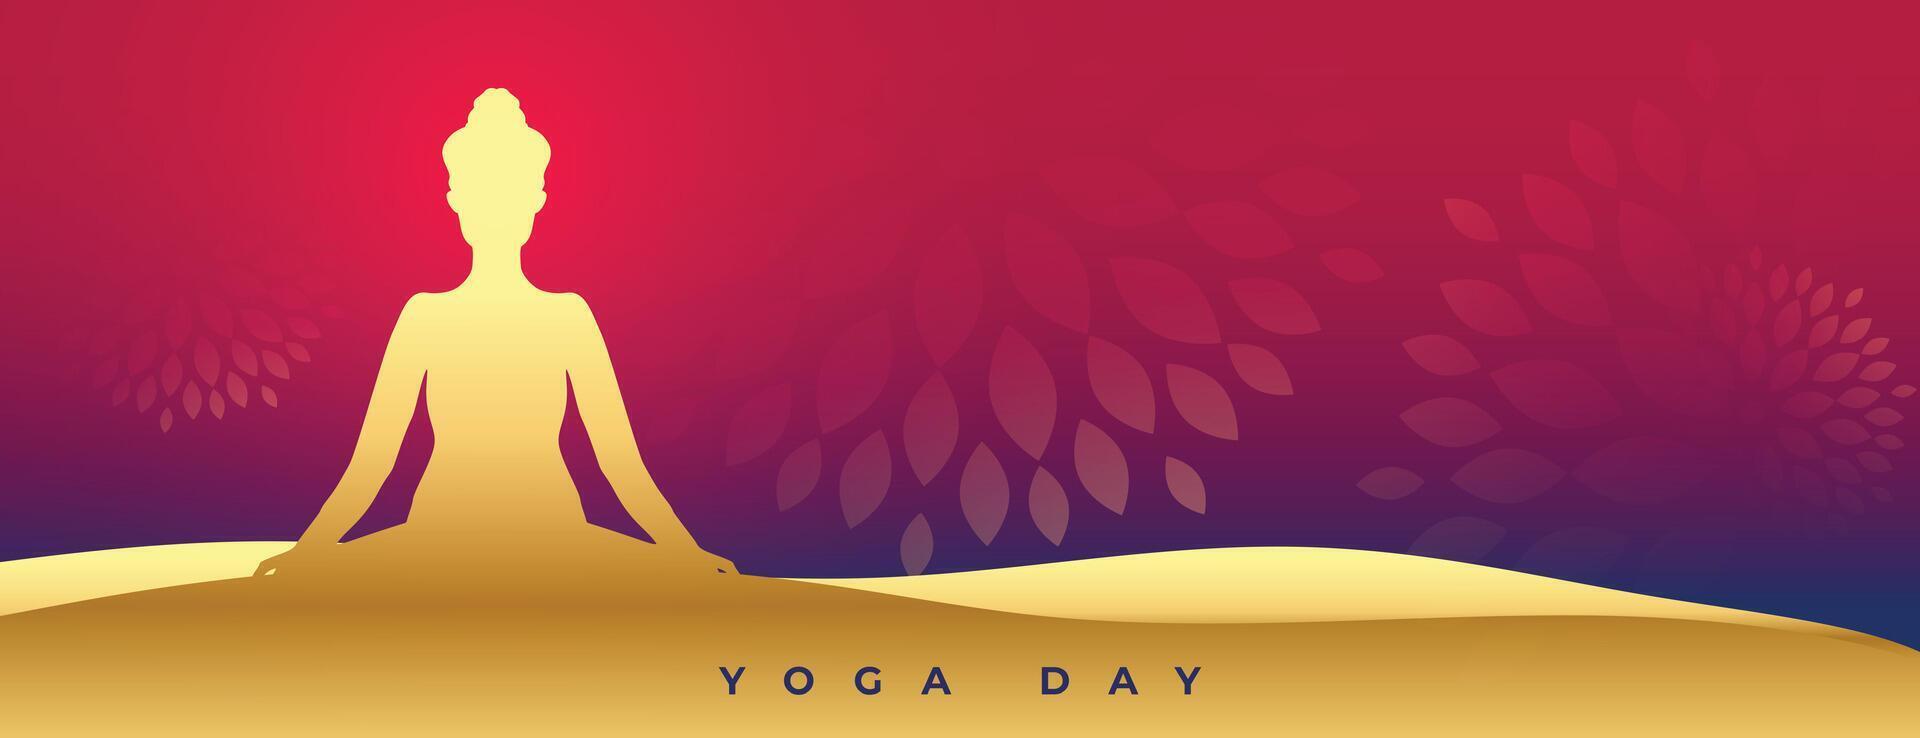 stylish world yoga day golden poster with mediation posture vector